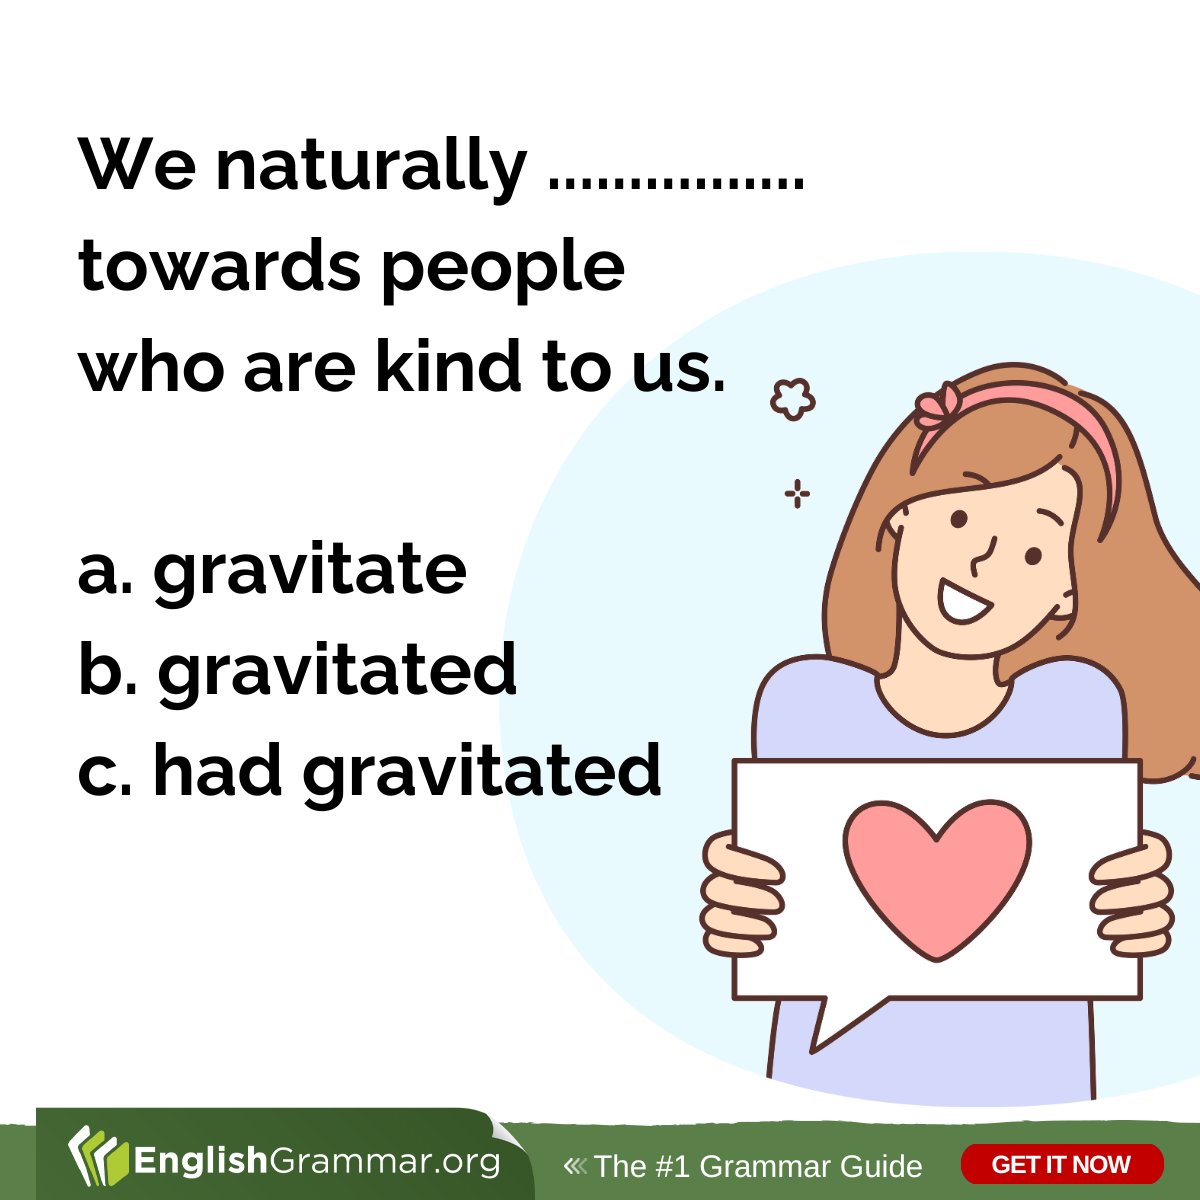 Which is the right answer? Find the right answer here: englishgrammar.org/tenses-exercis… #Englishgrammar #grammar #writing